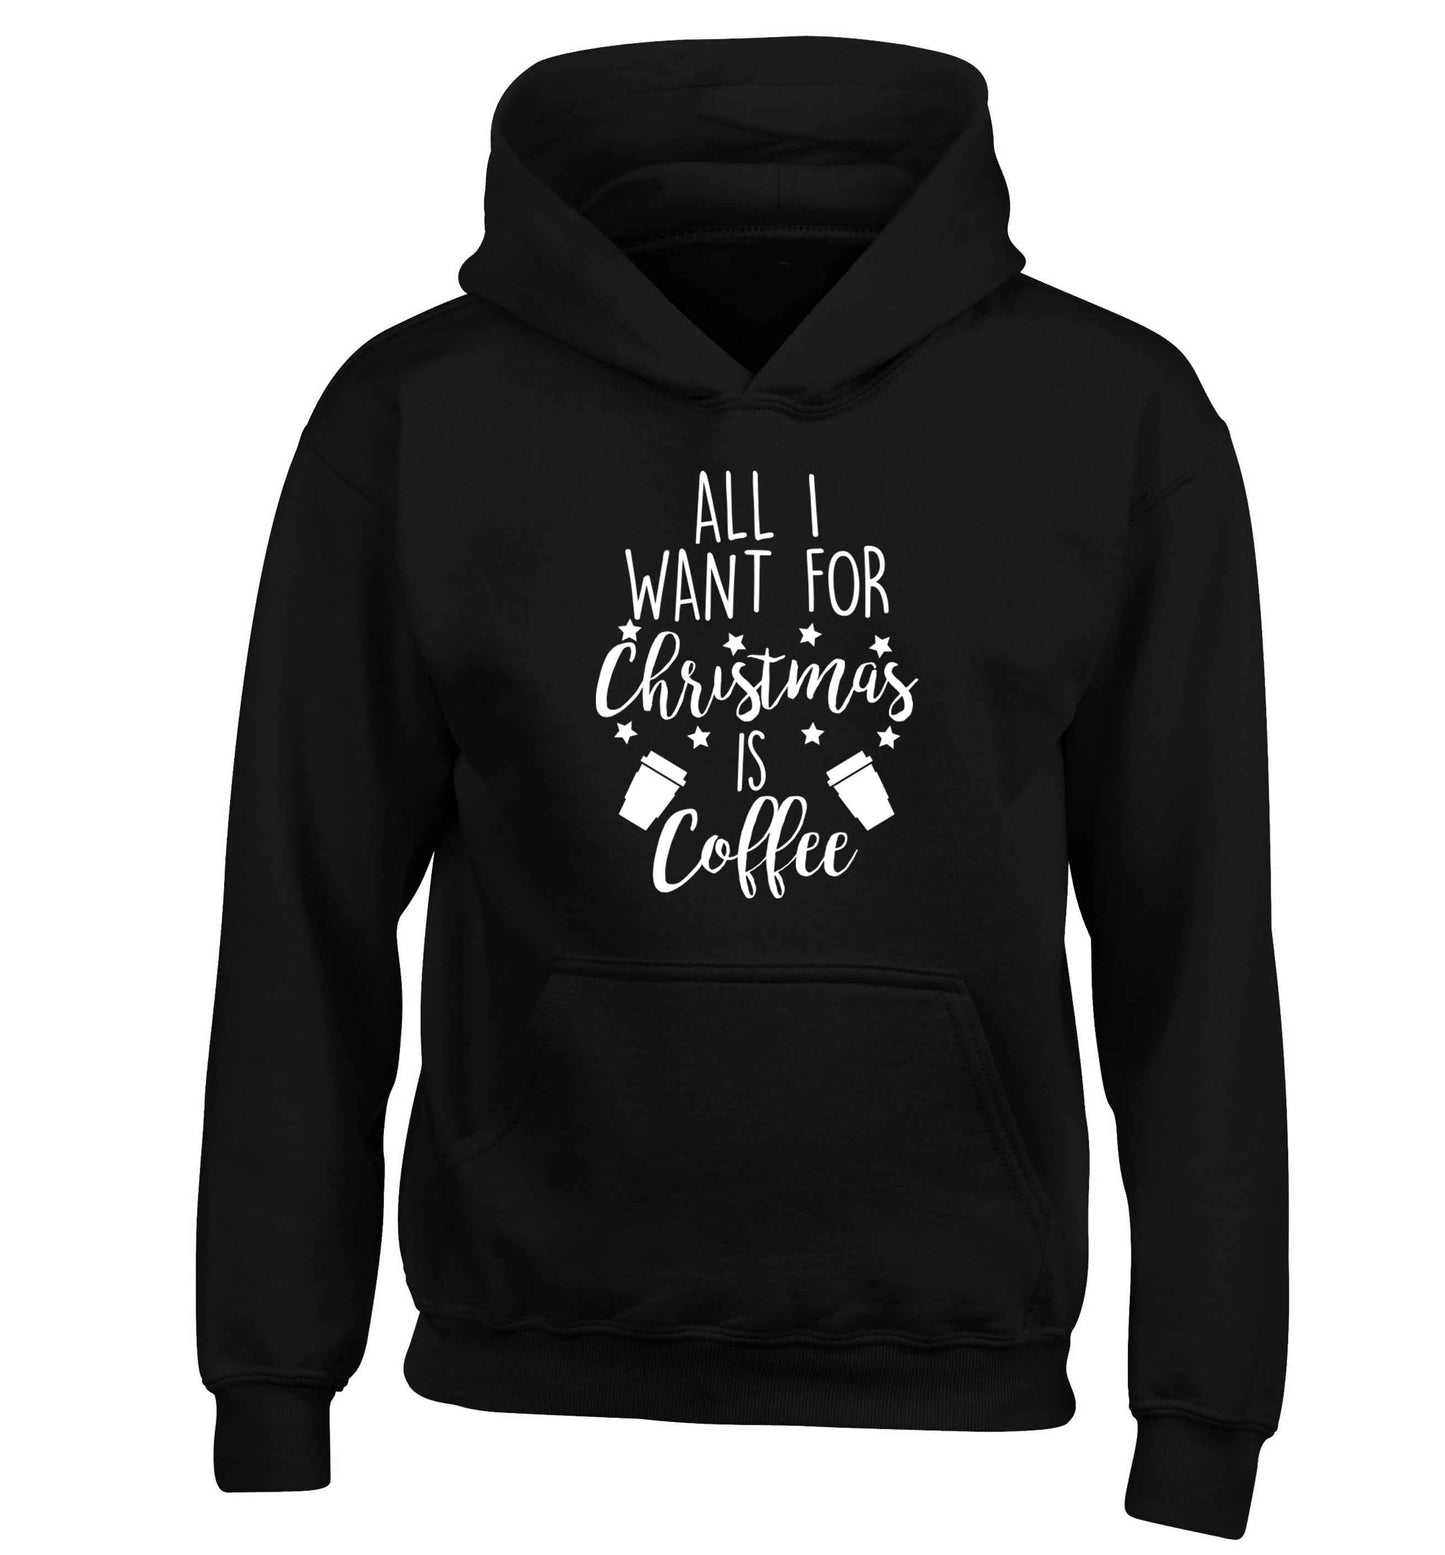 All I want for Christmas is coffee children's black hoodie 12-13 Years